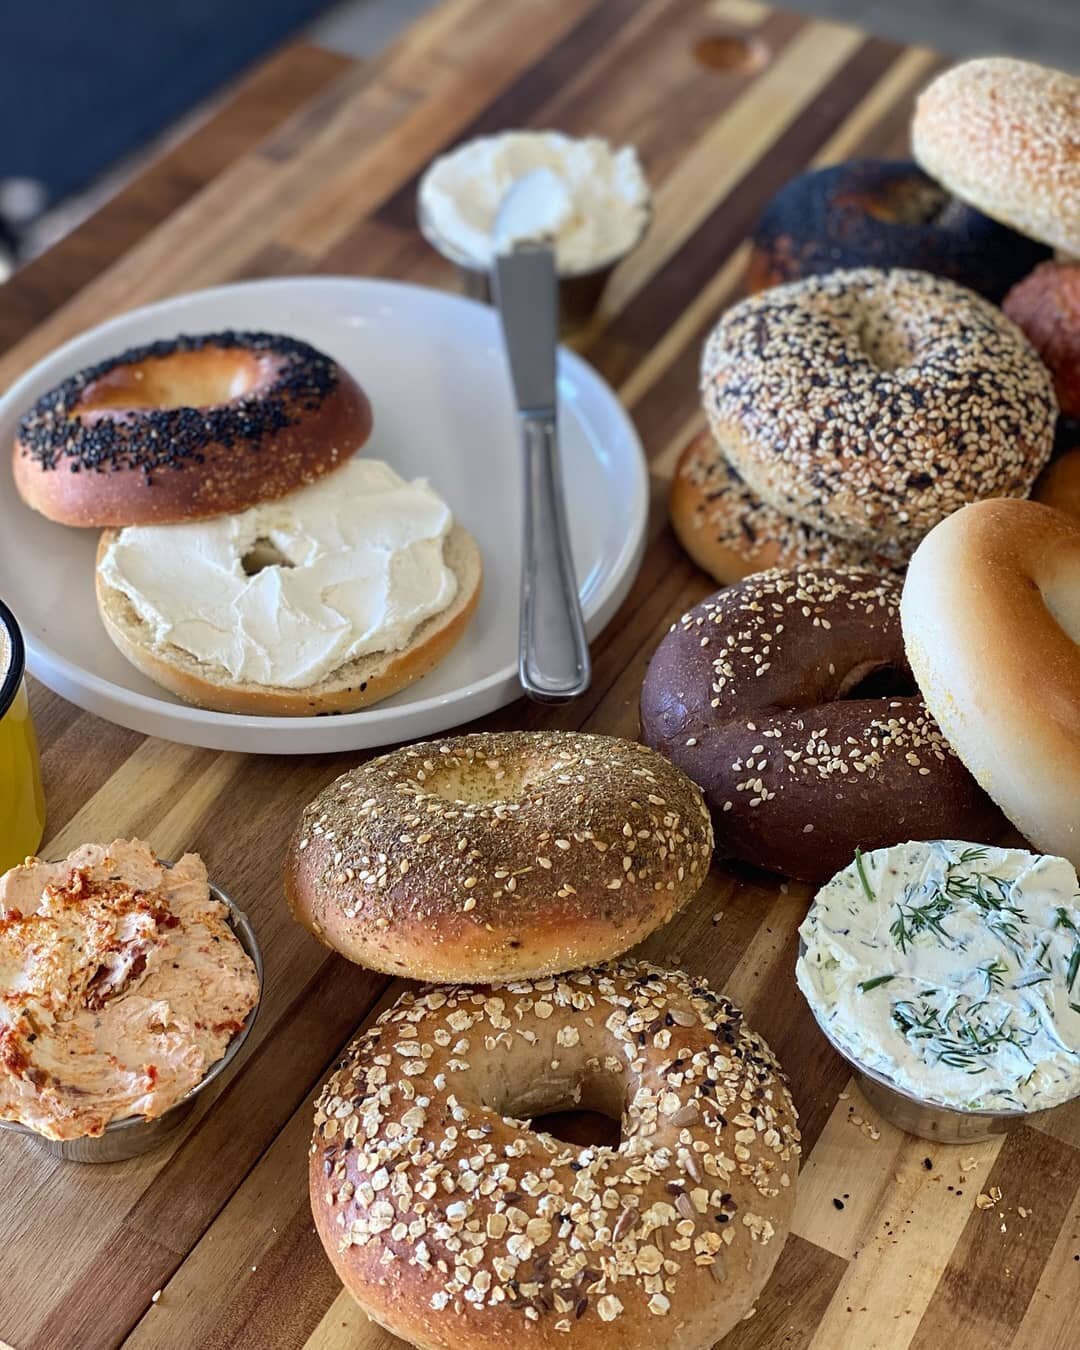 GIVE BACK ❤ every time you order bagels and spreads, you directly help feed and support displaced Armenian families impacted by the war in Artsakh, Armenia.

100% of REVENUES from the sale of @bukabagel bagels &amp; spreads are presently donated to @